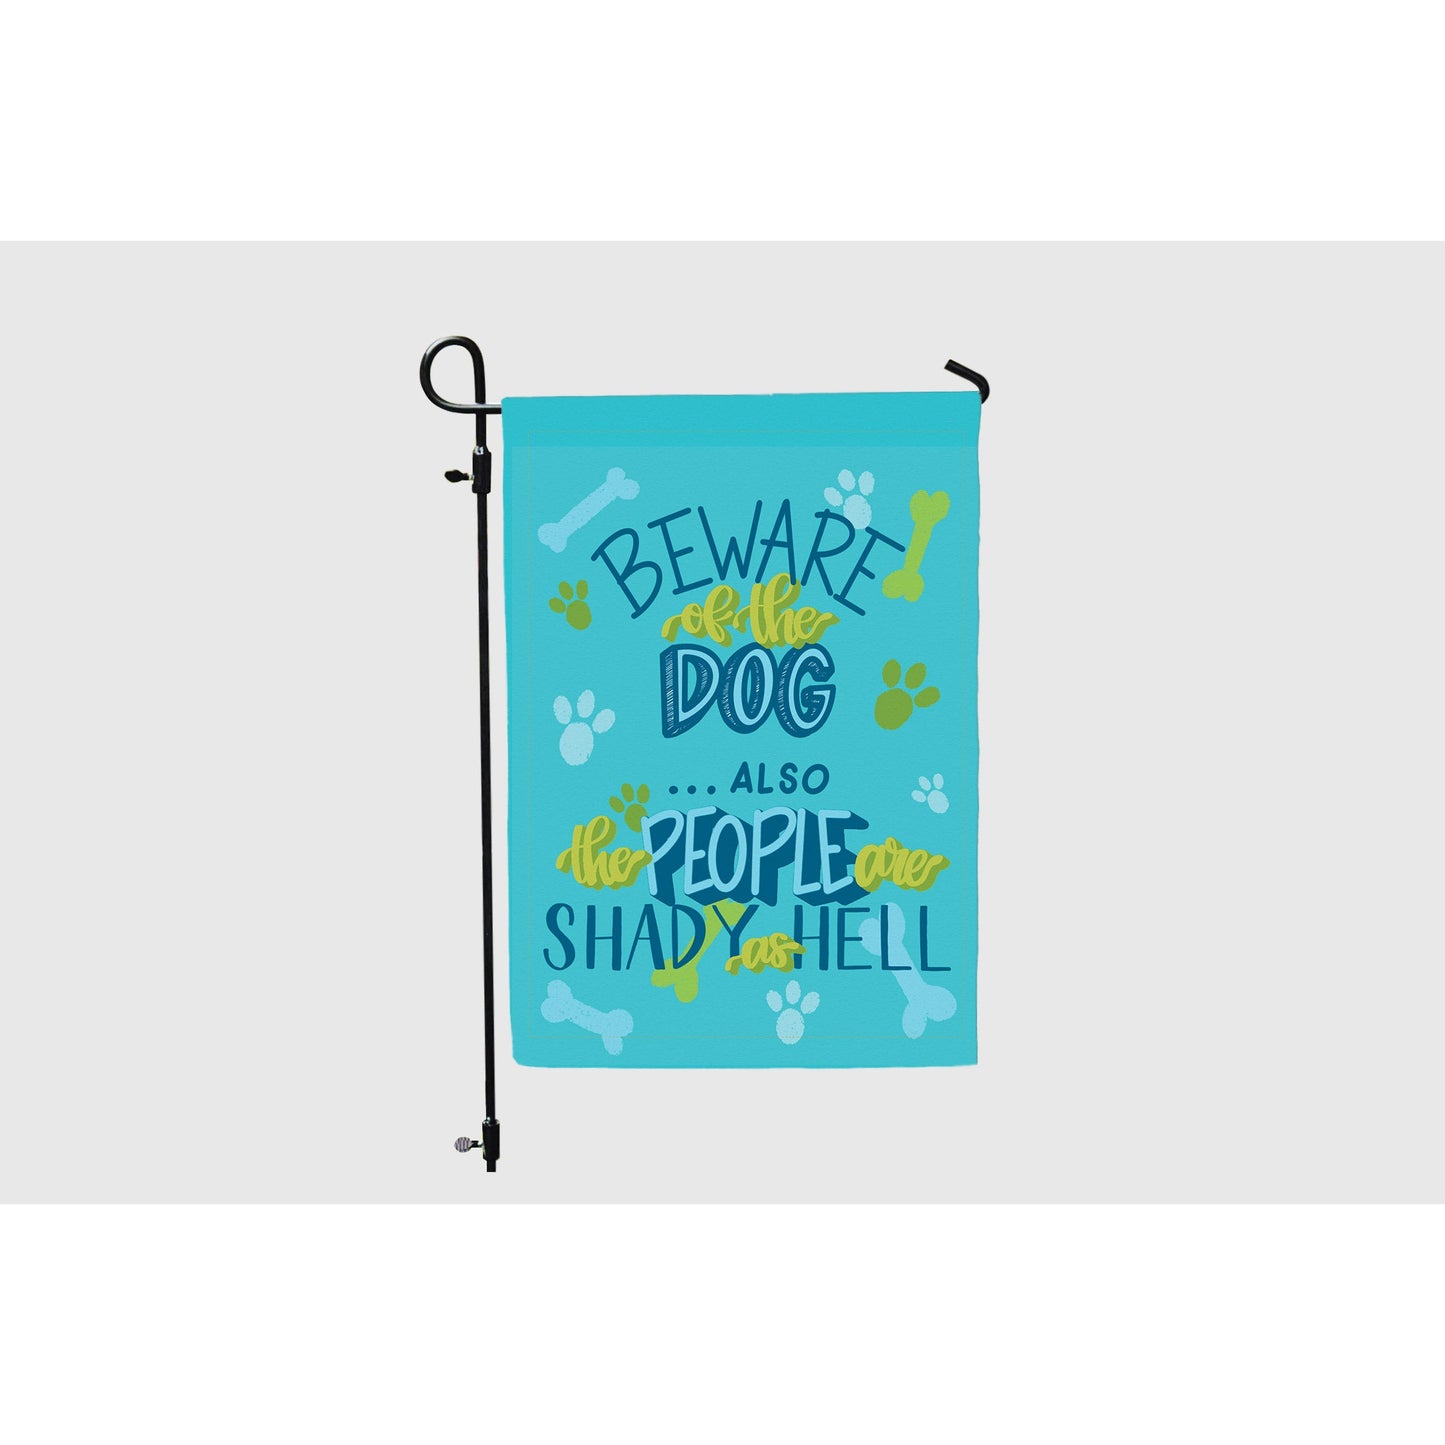 Beware of the Dog...Also, the People are Shady as Hell - Garden Flag - 12" x 18"